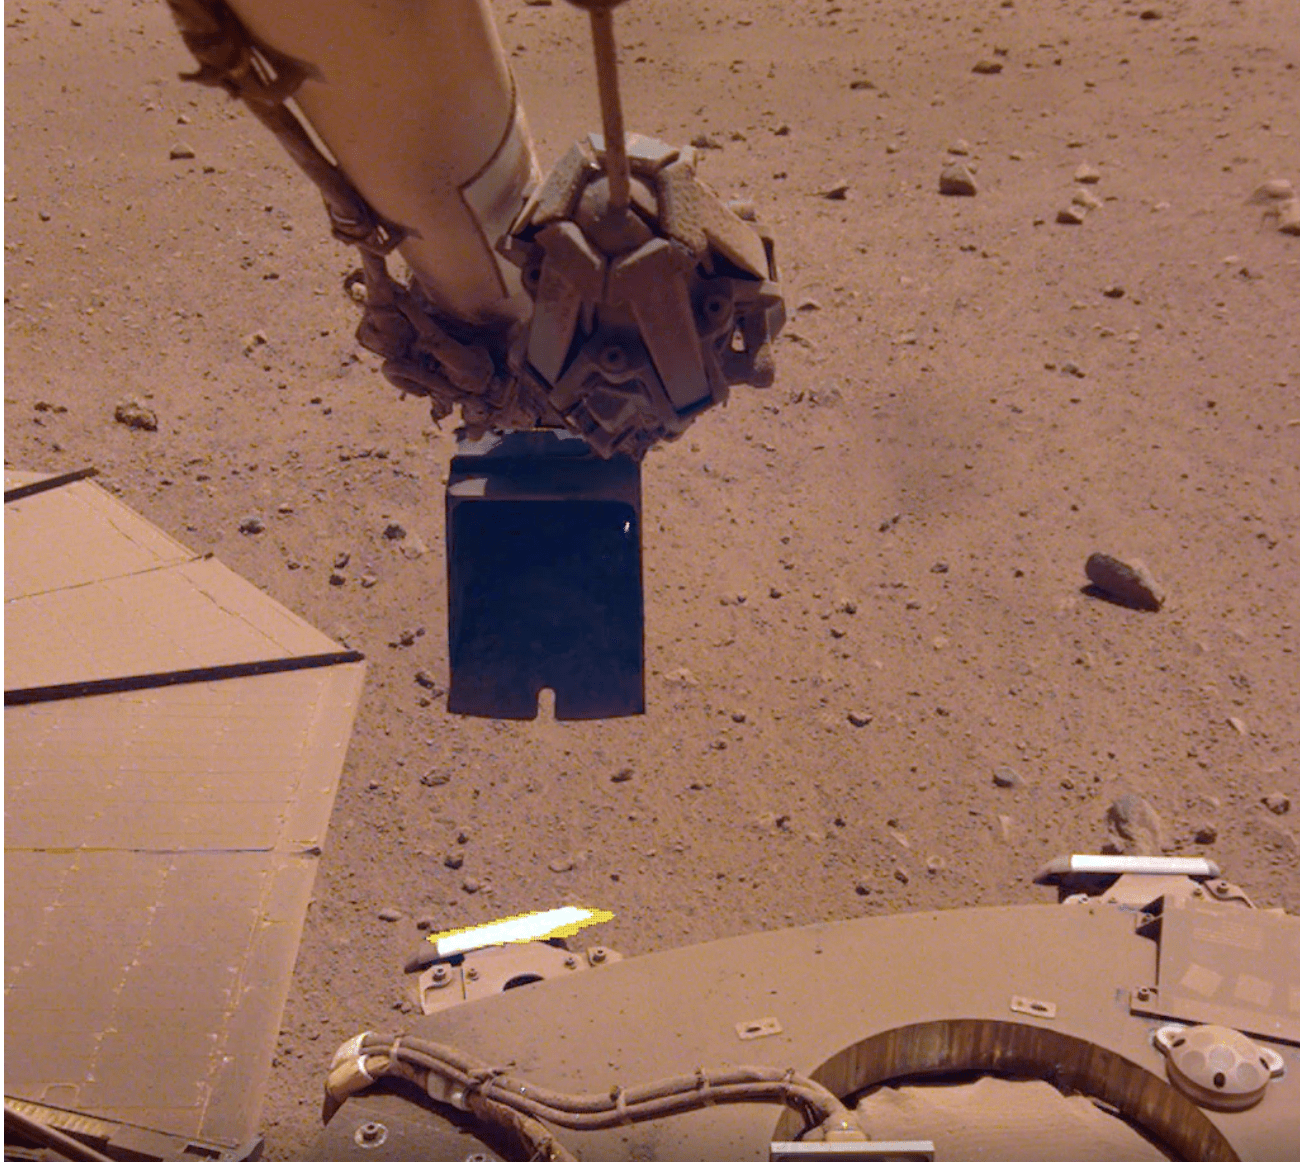 InSight's robotic arm attempting to remove dust from the solar panel by sprinkling sand in the wind. (Image: NASA/JPL-Caltech)